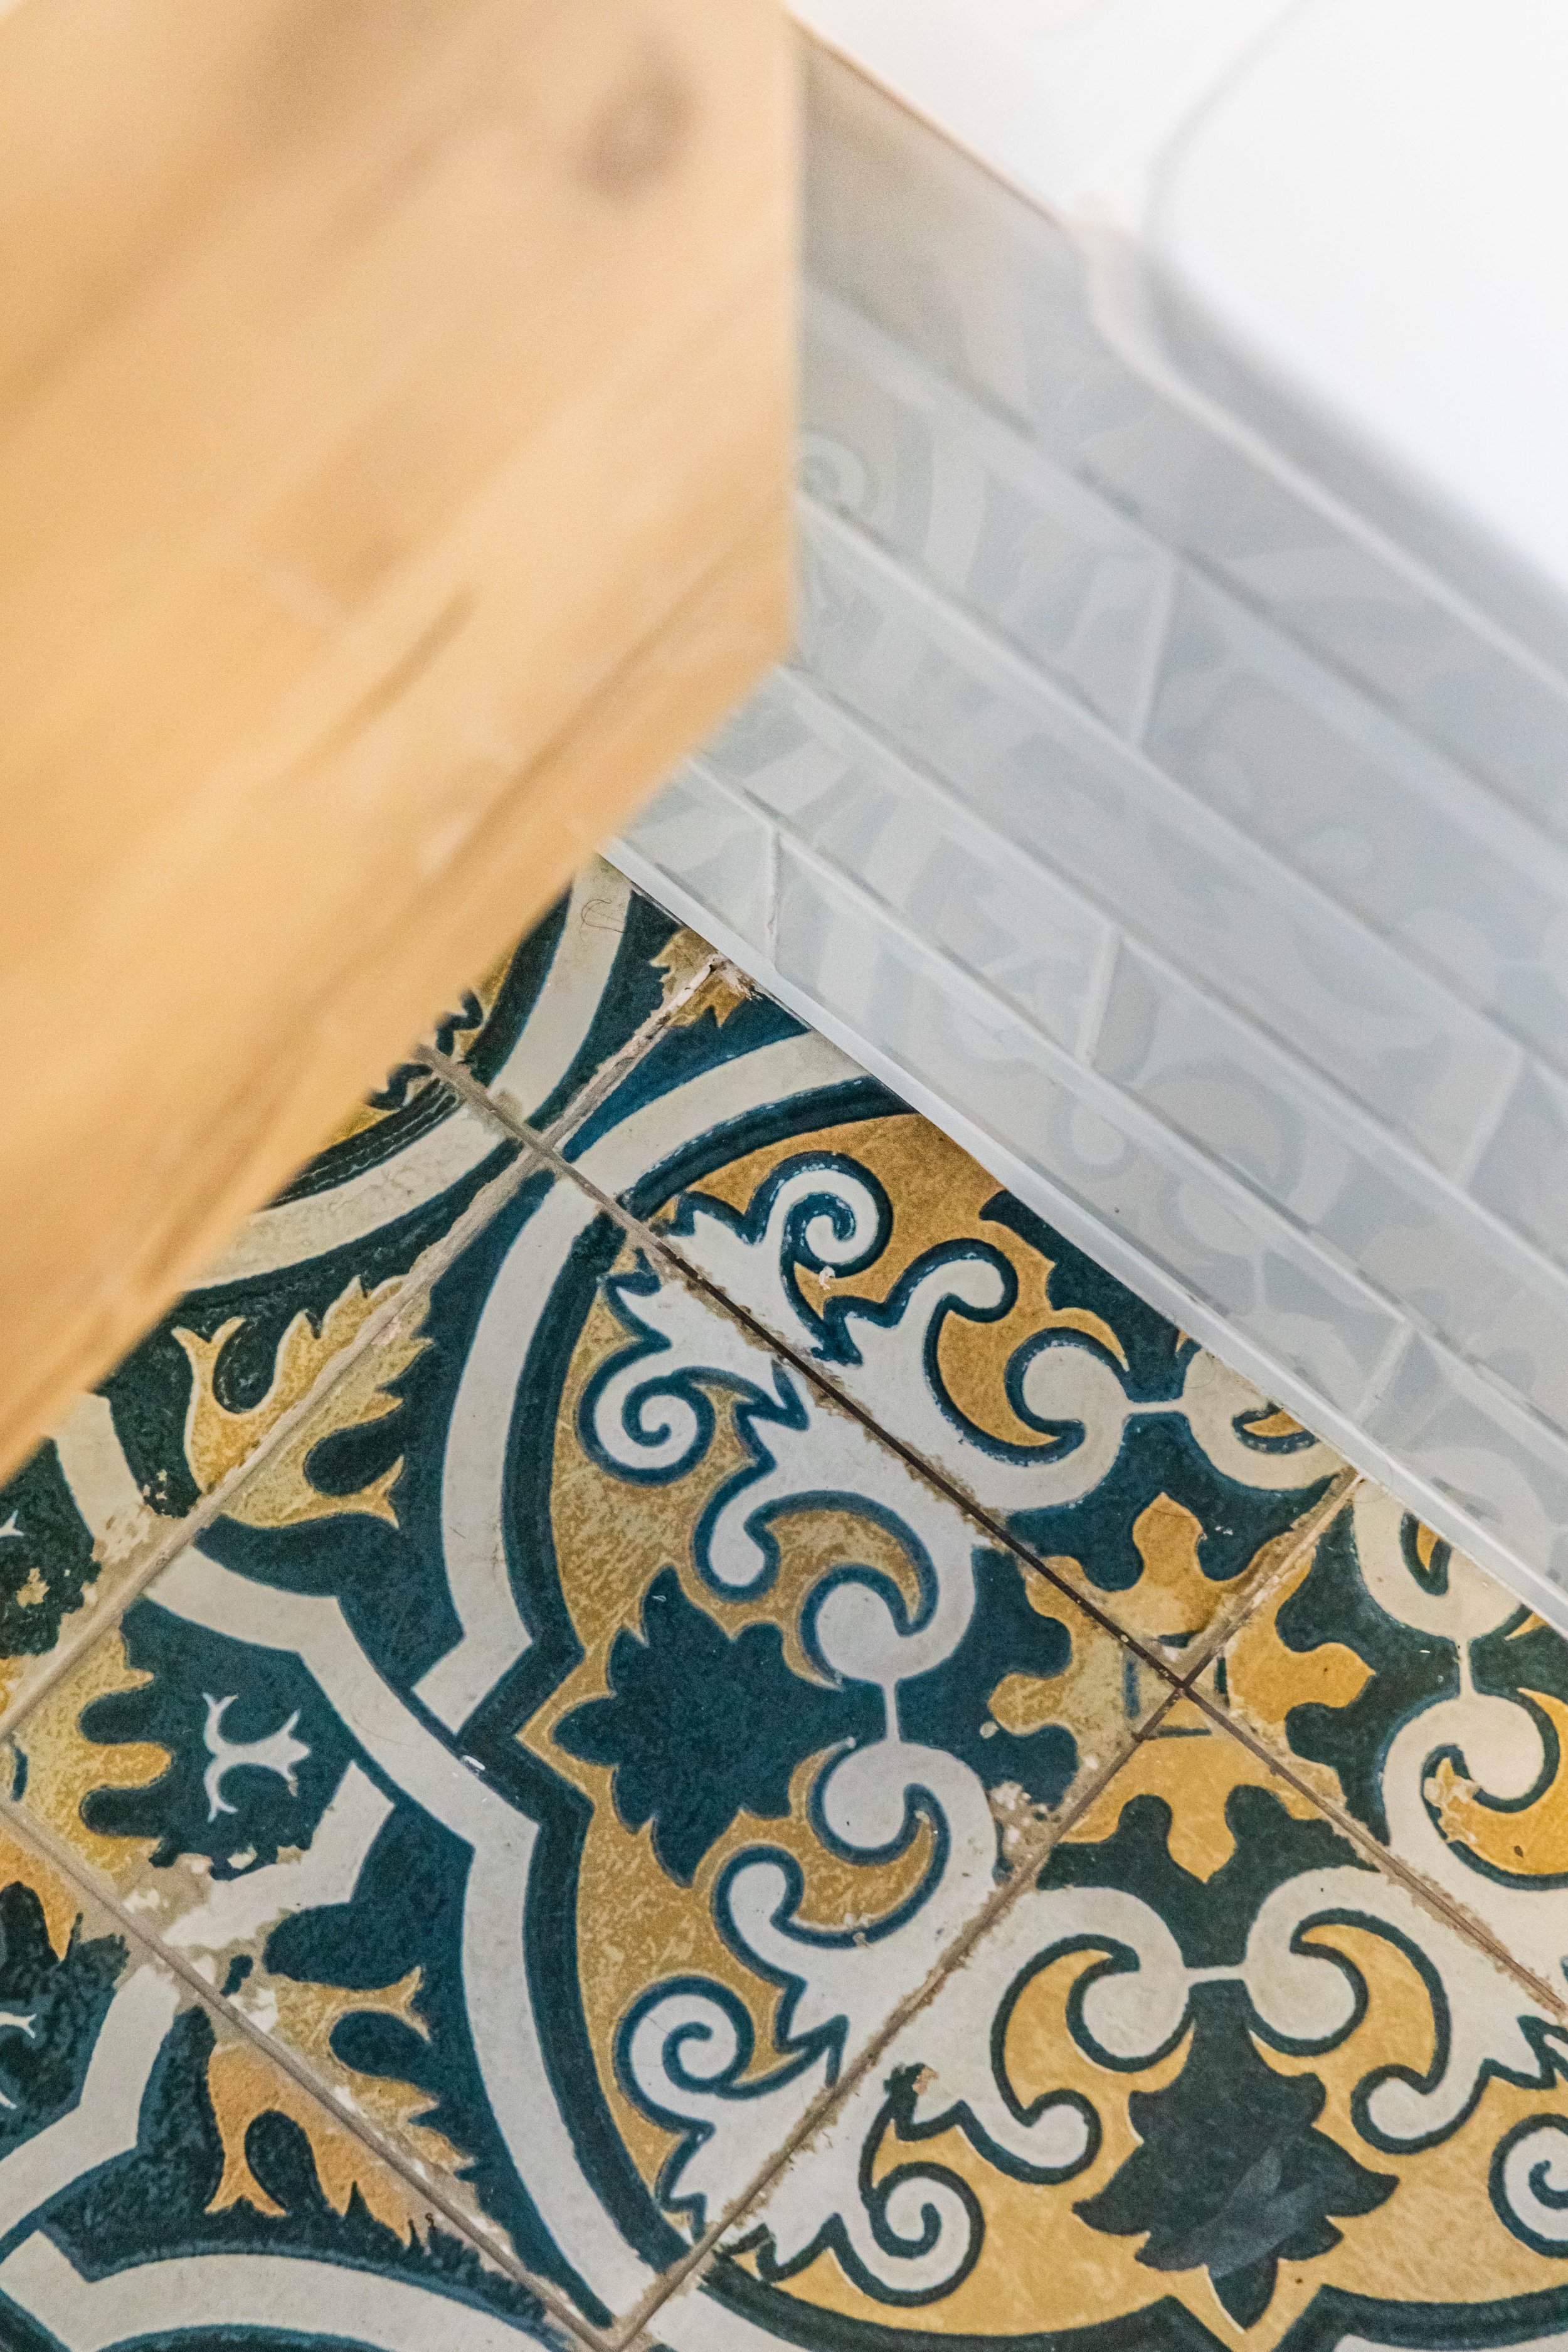 Blue white and yellow mediterranean floor tile with white metro tile and wooden vanity Orsetto Interiors London UK.jpg